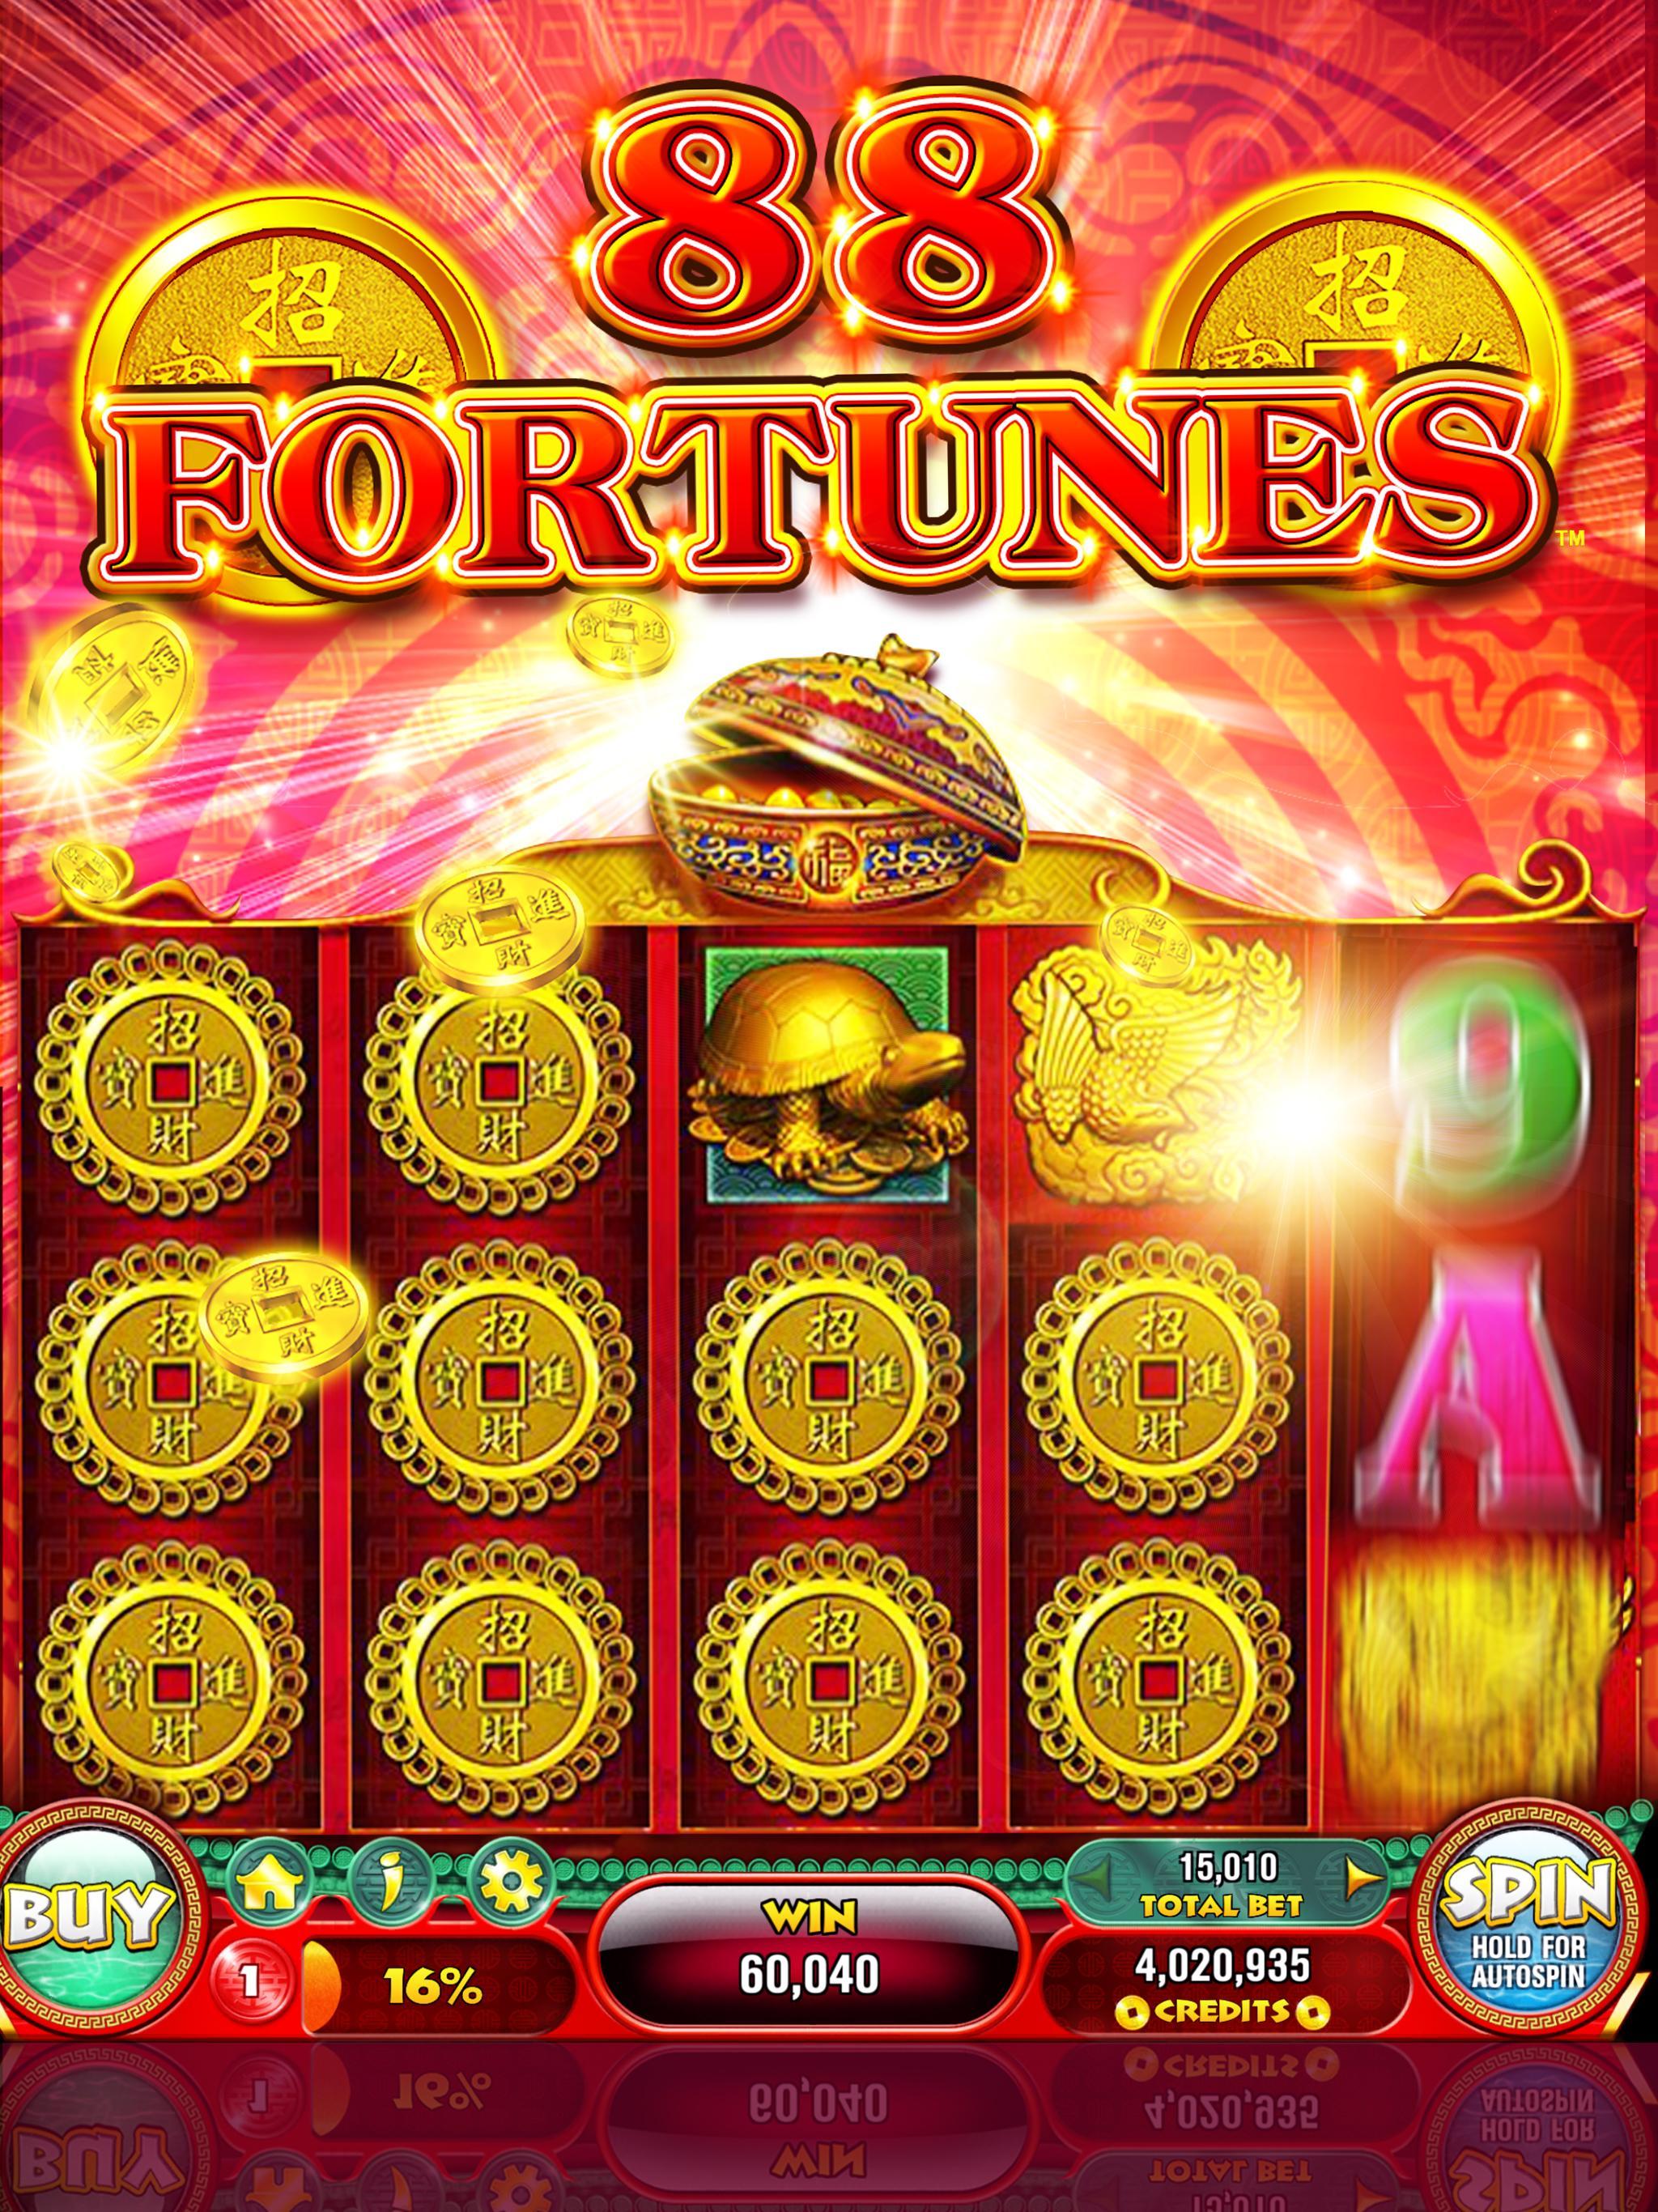 88 fortunes slots casino games tips and tricks